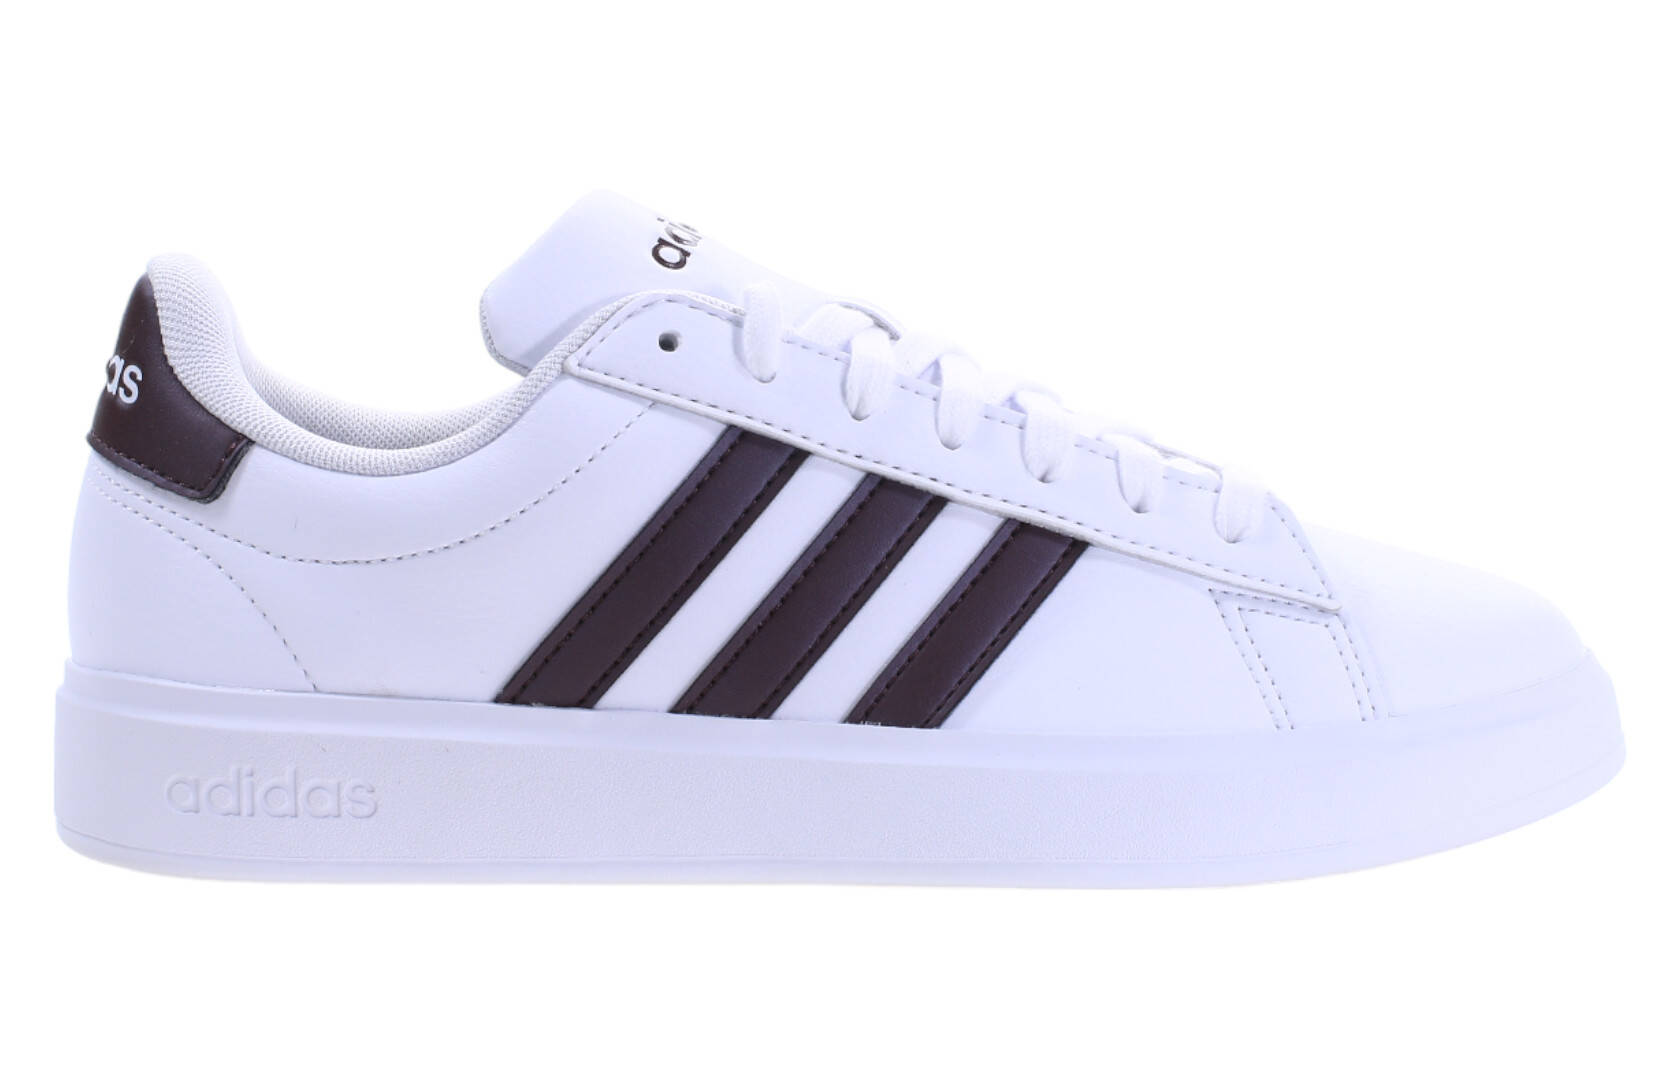 Adidas GRAND COURT 2.0 ID2978 women's shoes